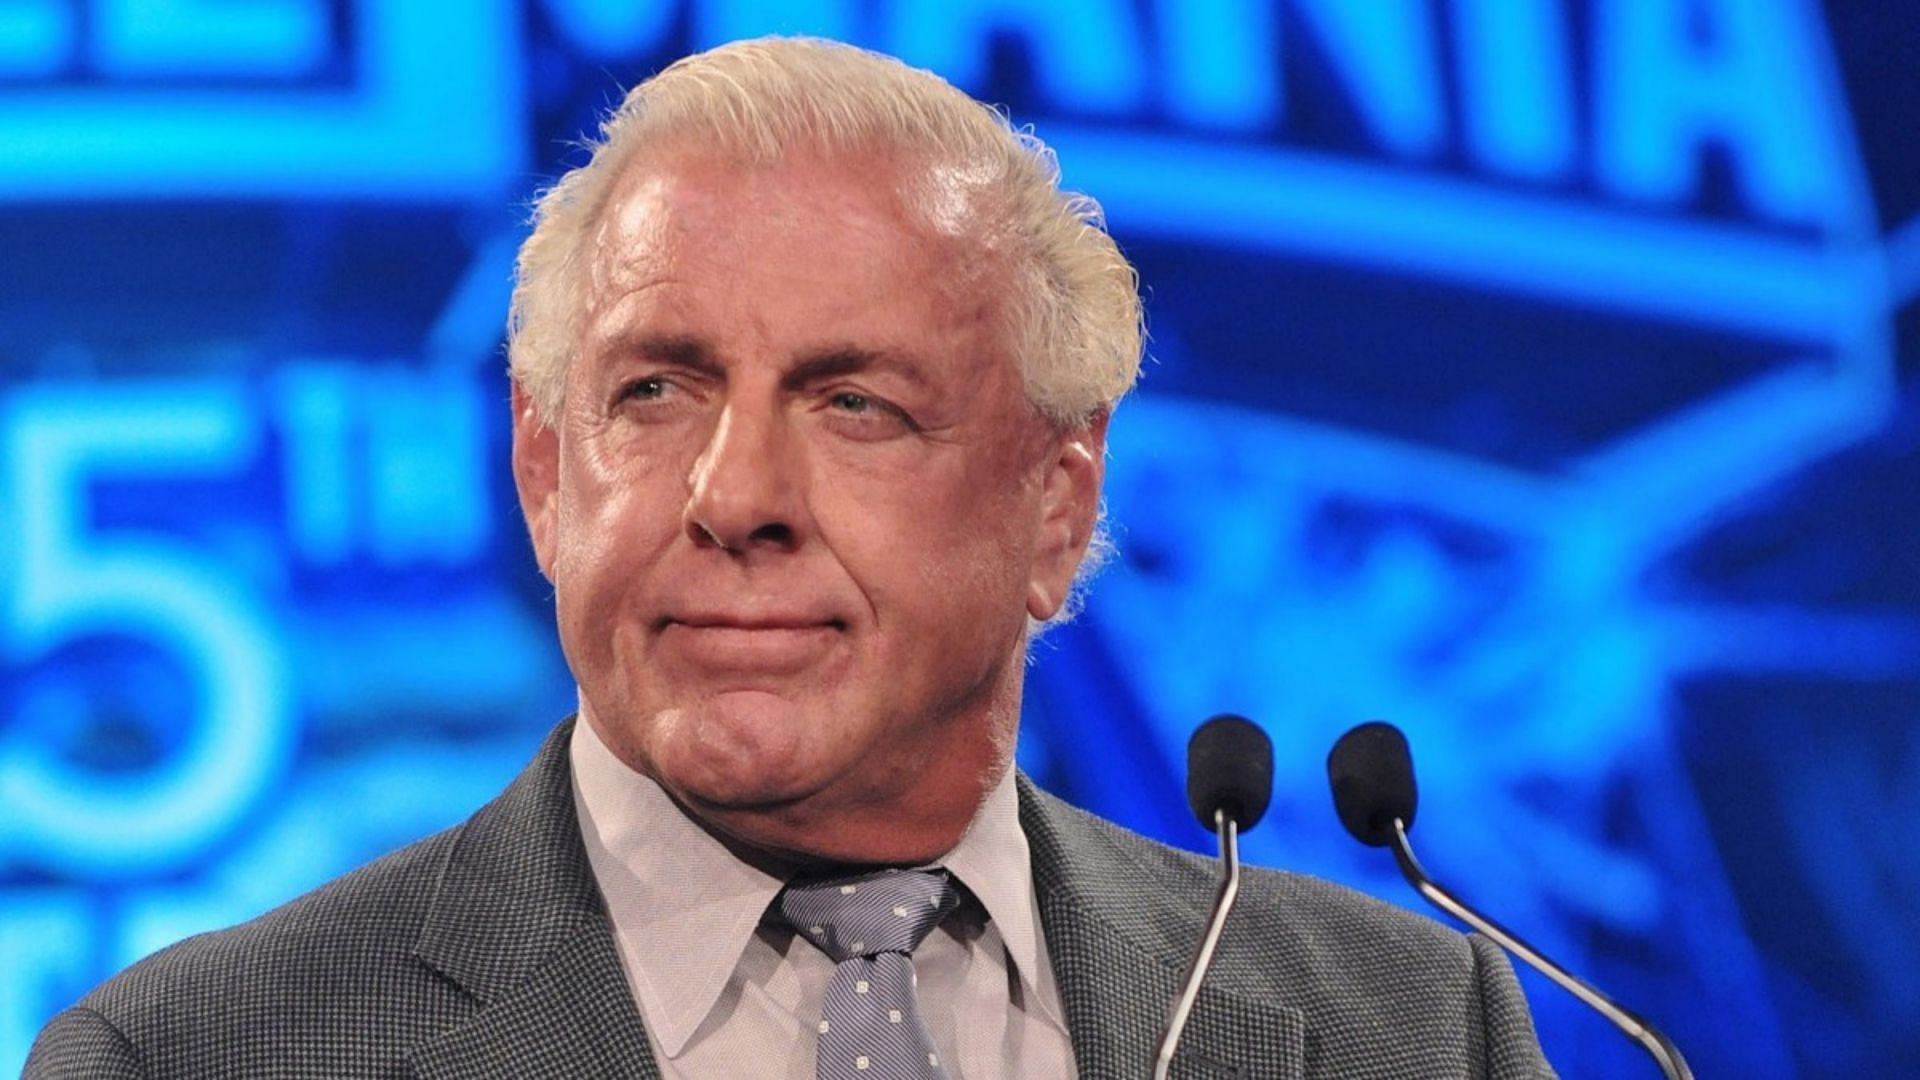 Ric Flair at a WrestleMania 25 media event in 2009